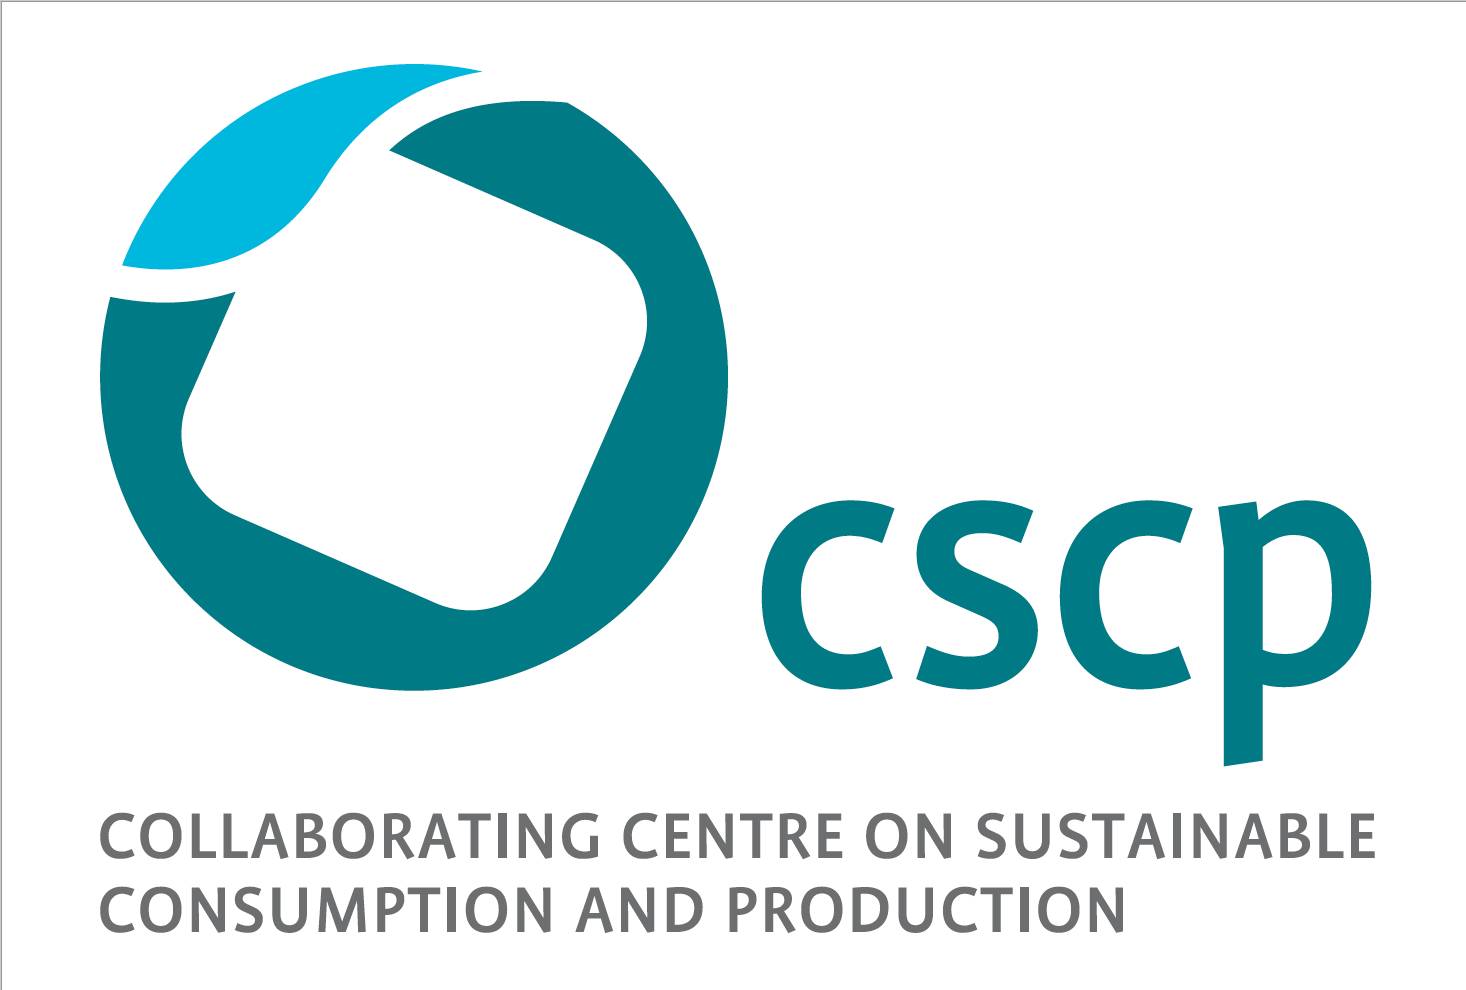 The Collaborating Centre on Sustainable Consumption and Production (CSCP)